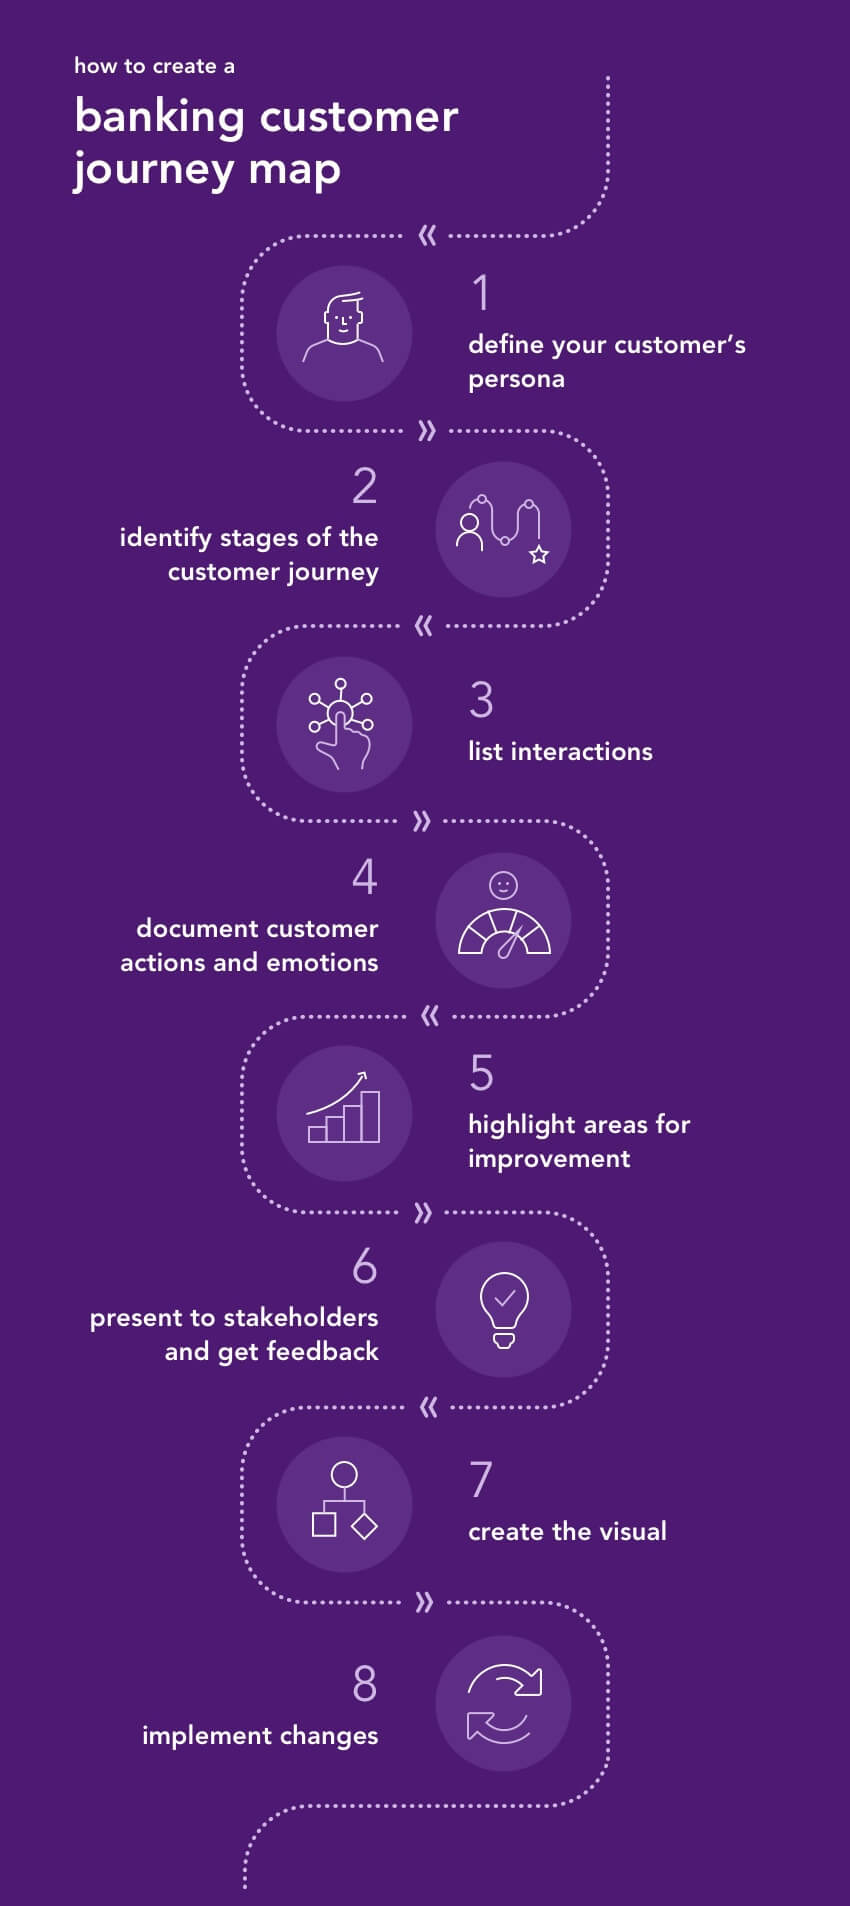 banking-customer-journey-map-graphic-goes-through-the-eight-steps